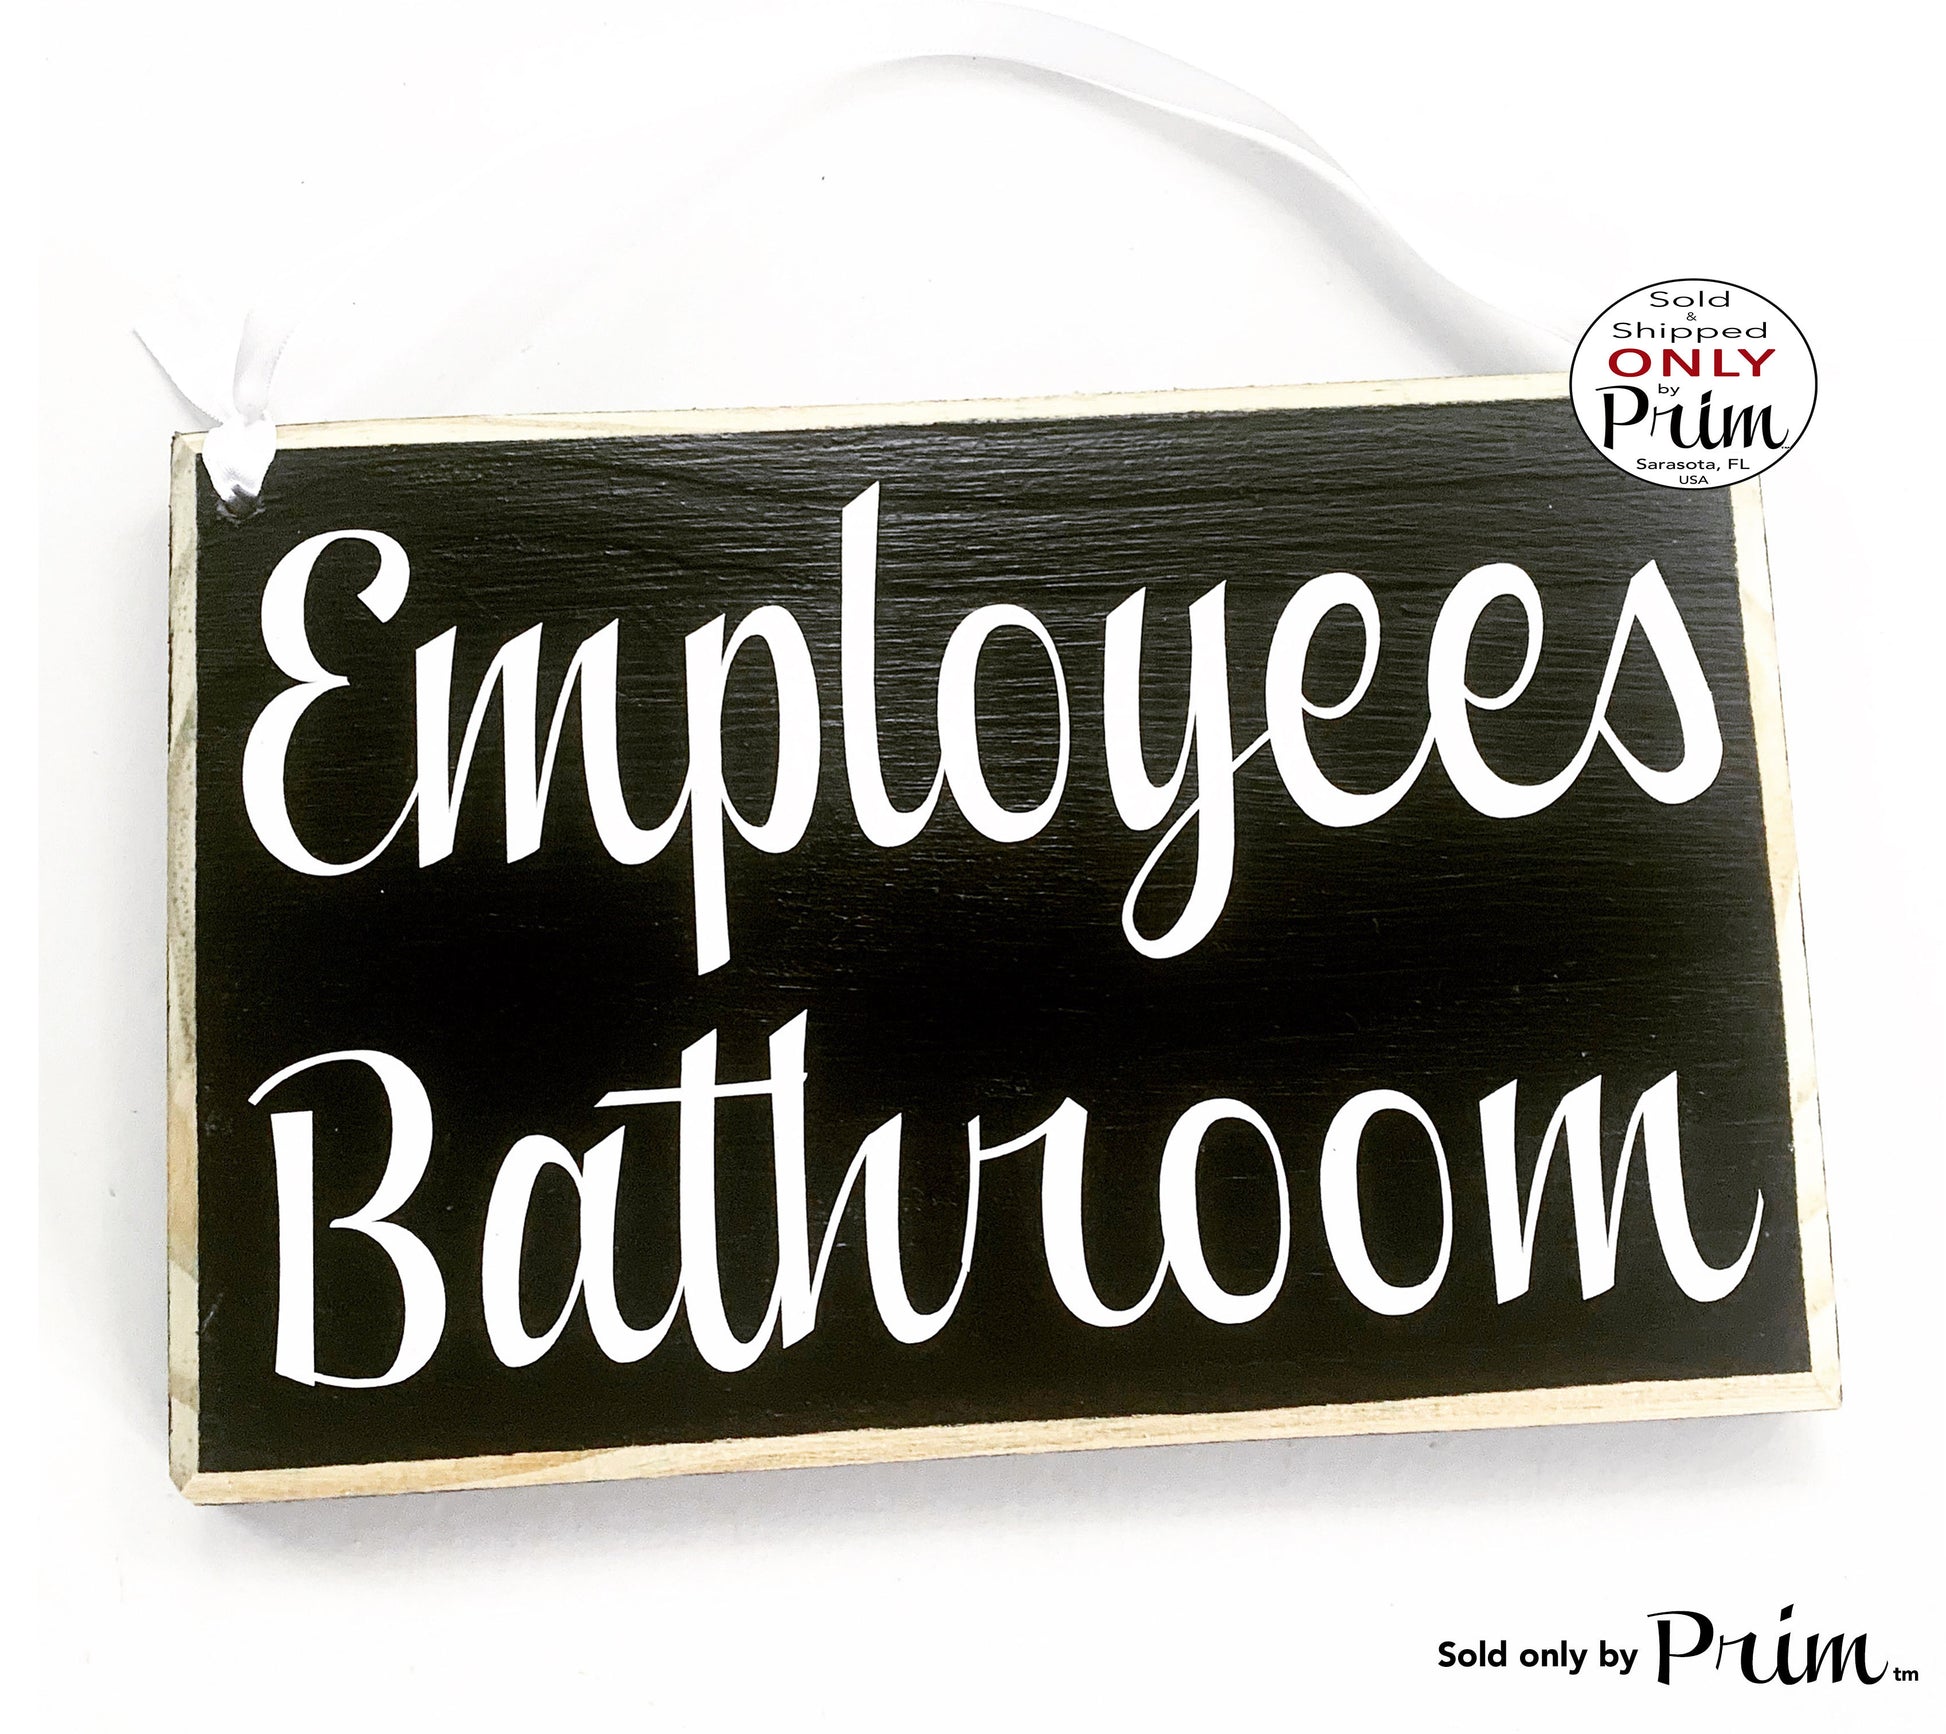 8x6 Employees Bathroom Custom Wood Sign Sorry No Public Restrooms Bathroom Loo Business Store Spa Office Staff Only Do Not Enter Door Plaque Designs by Prim